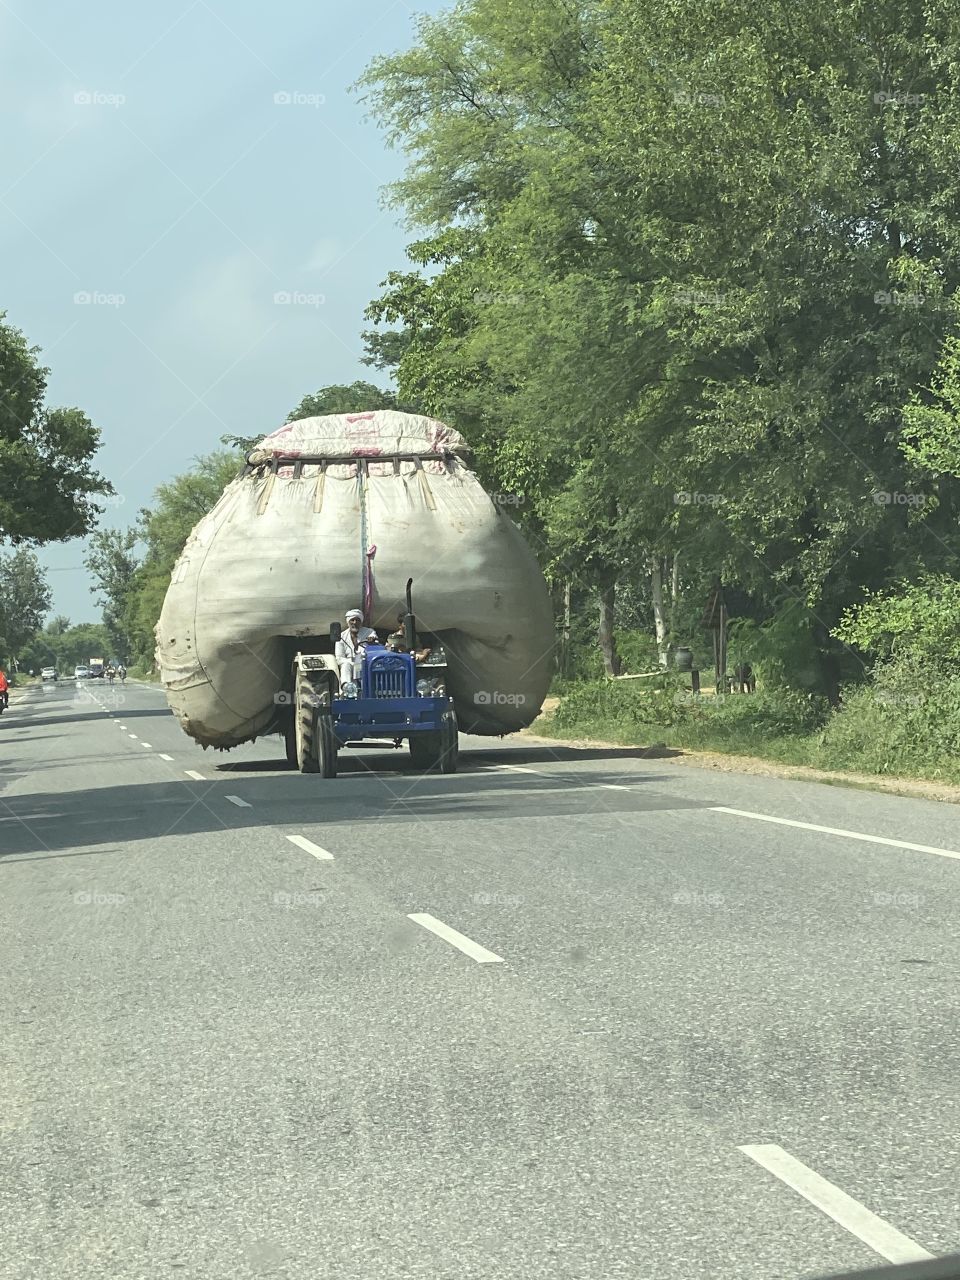 A small tractor but had huge load